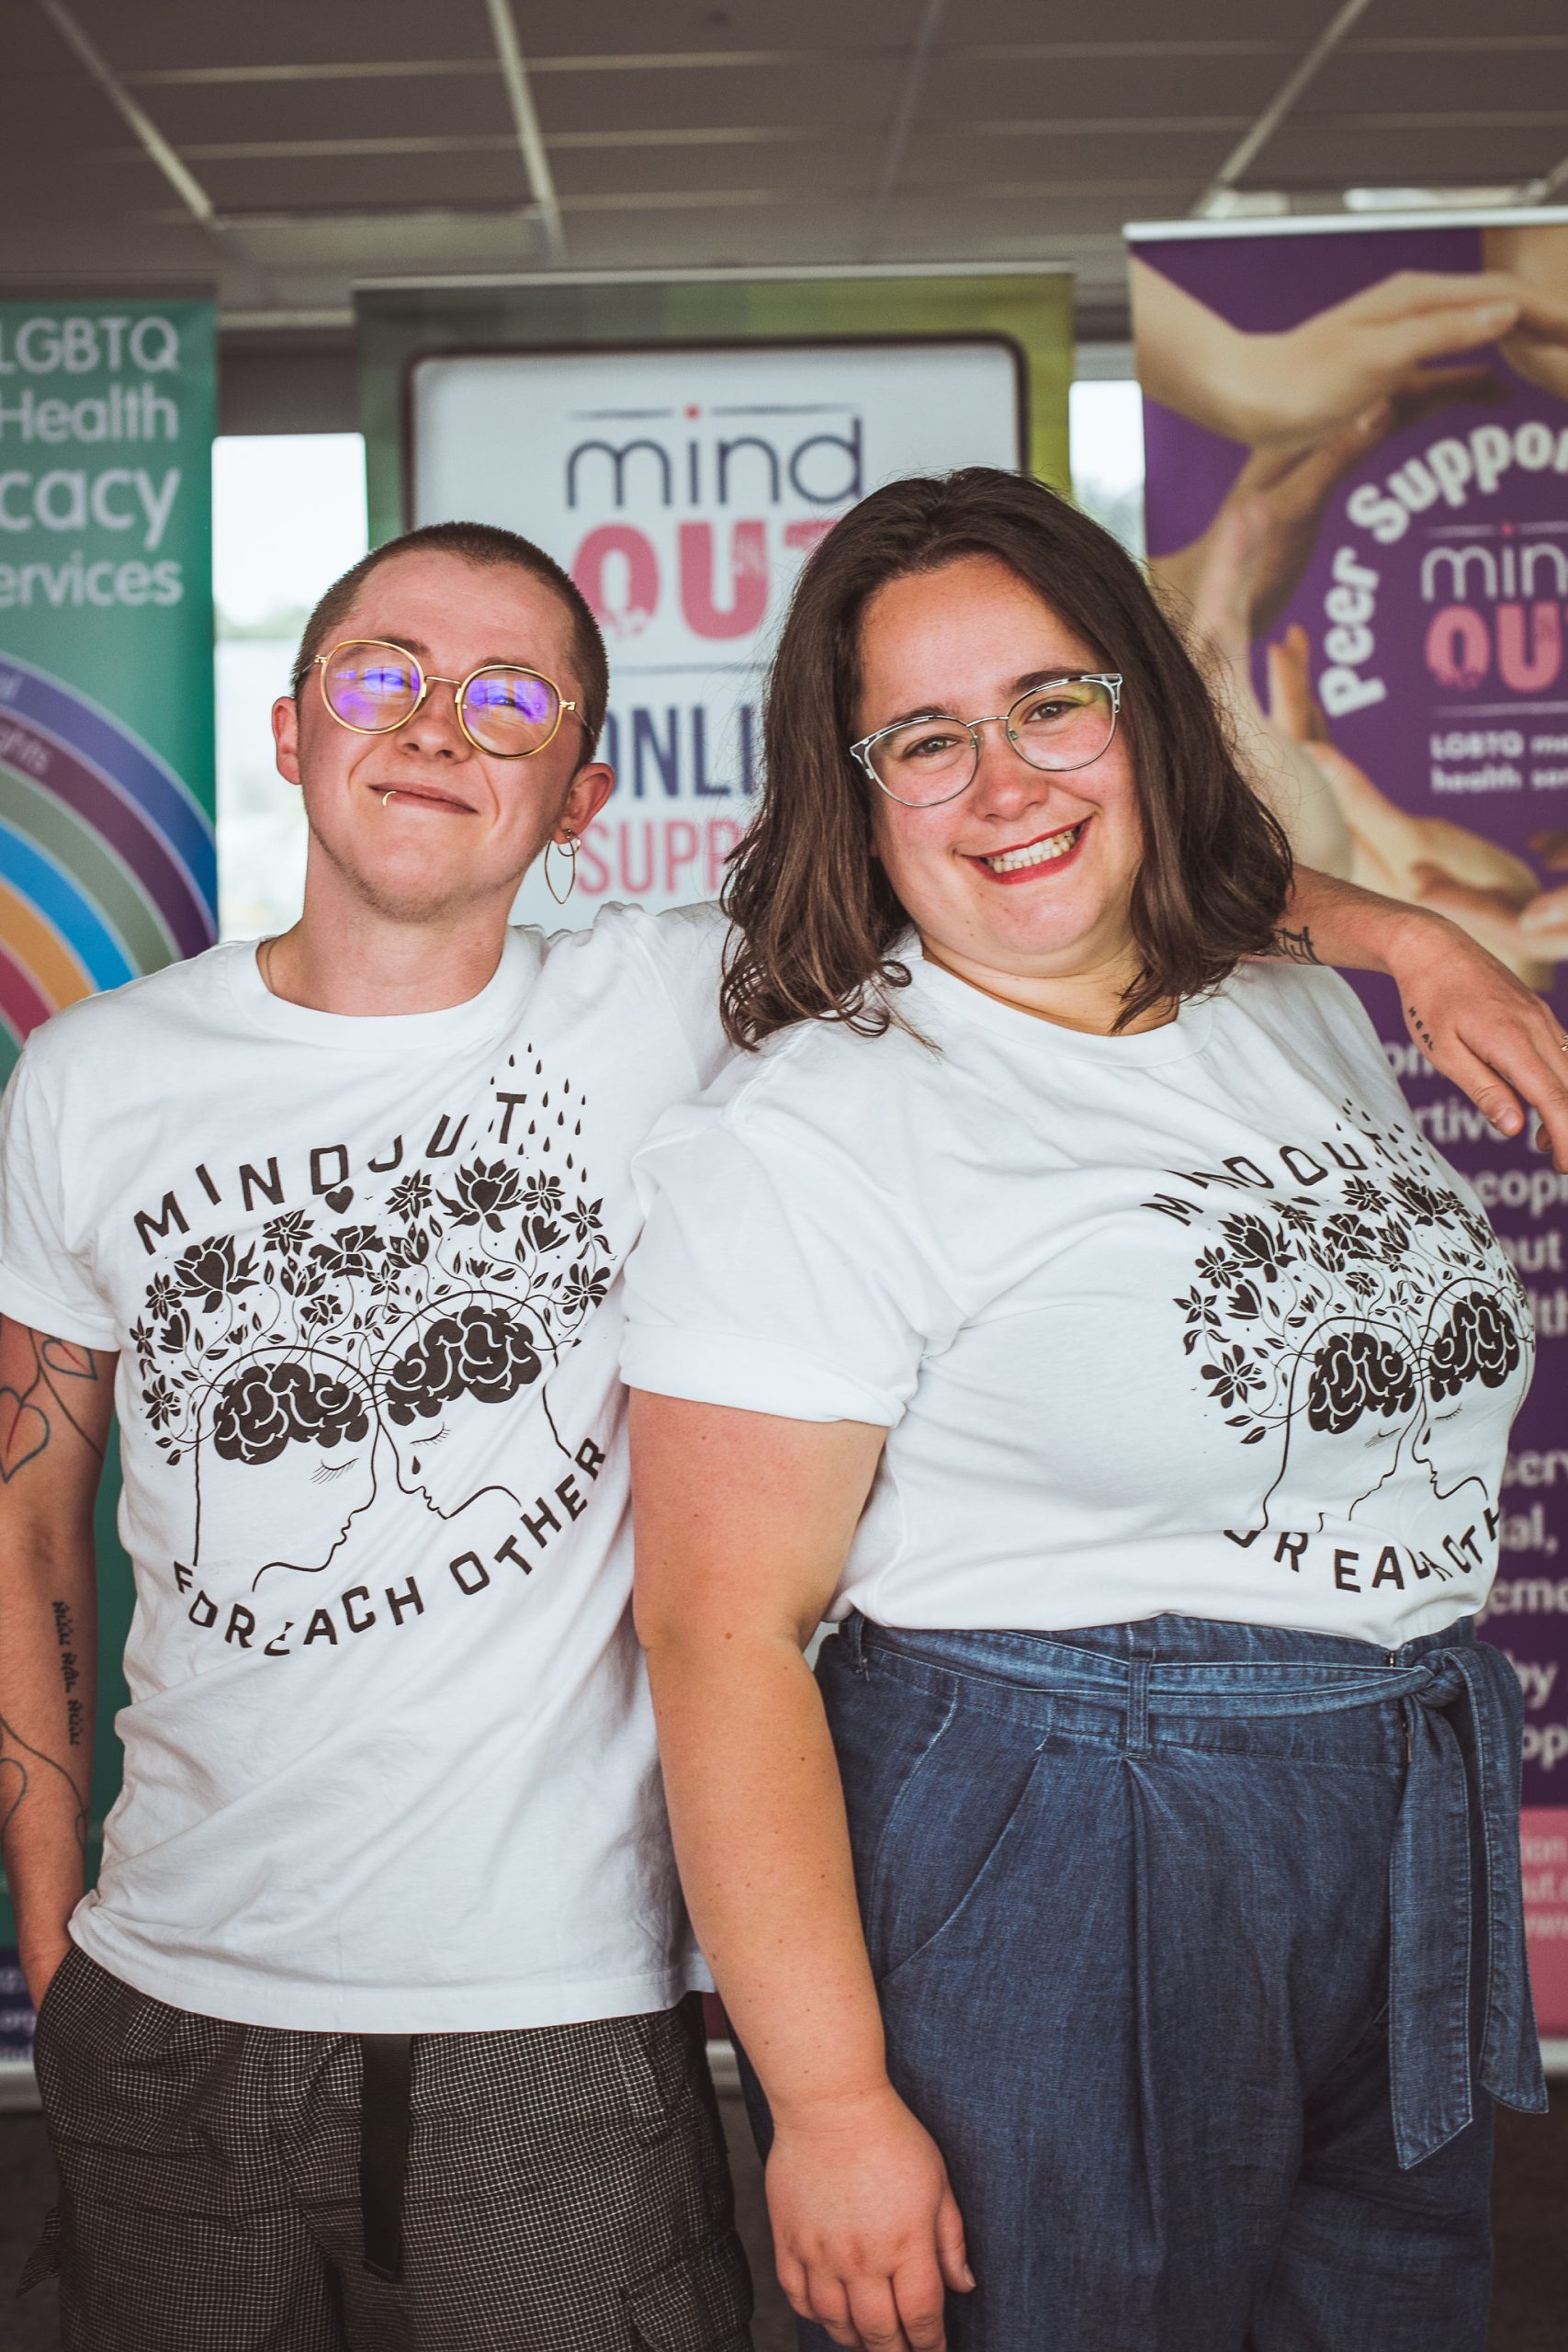 Kip and Gabi (MindOut staff) smiling into the camera wearing the new MindOut merch designed by Fox Fisher